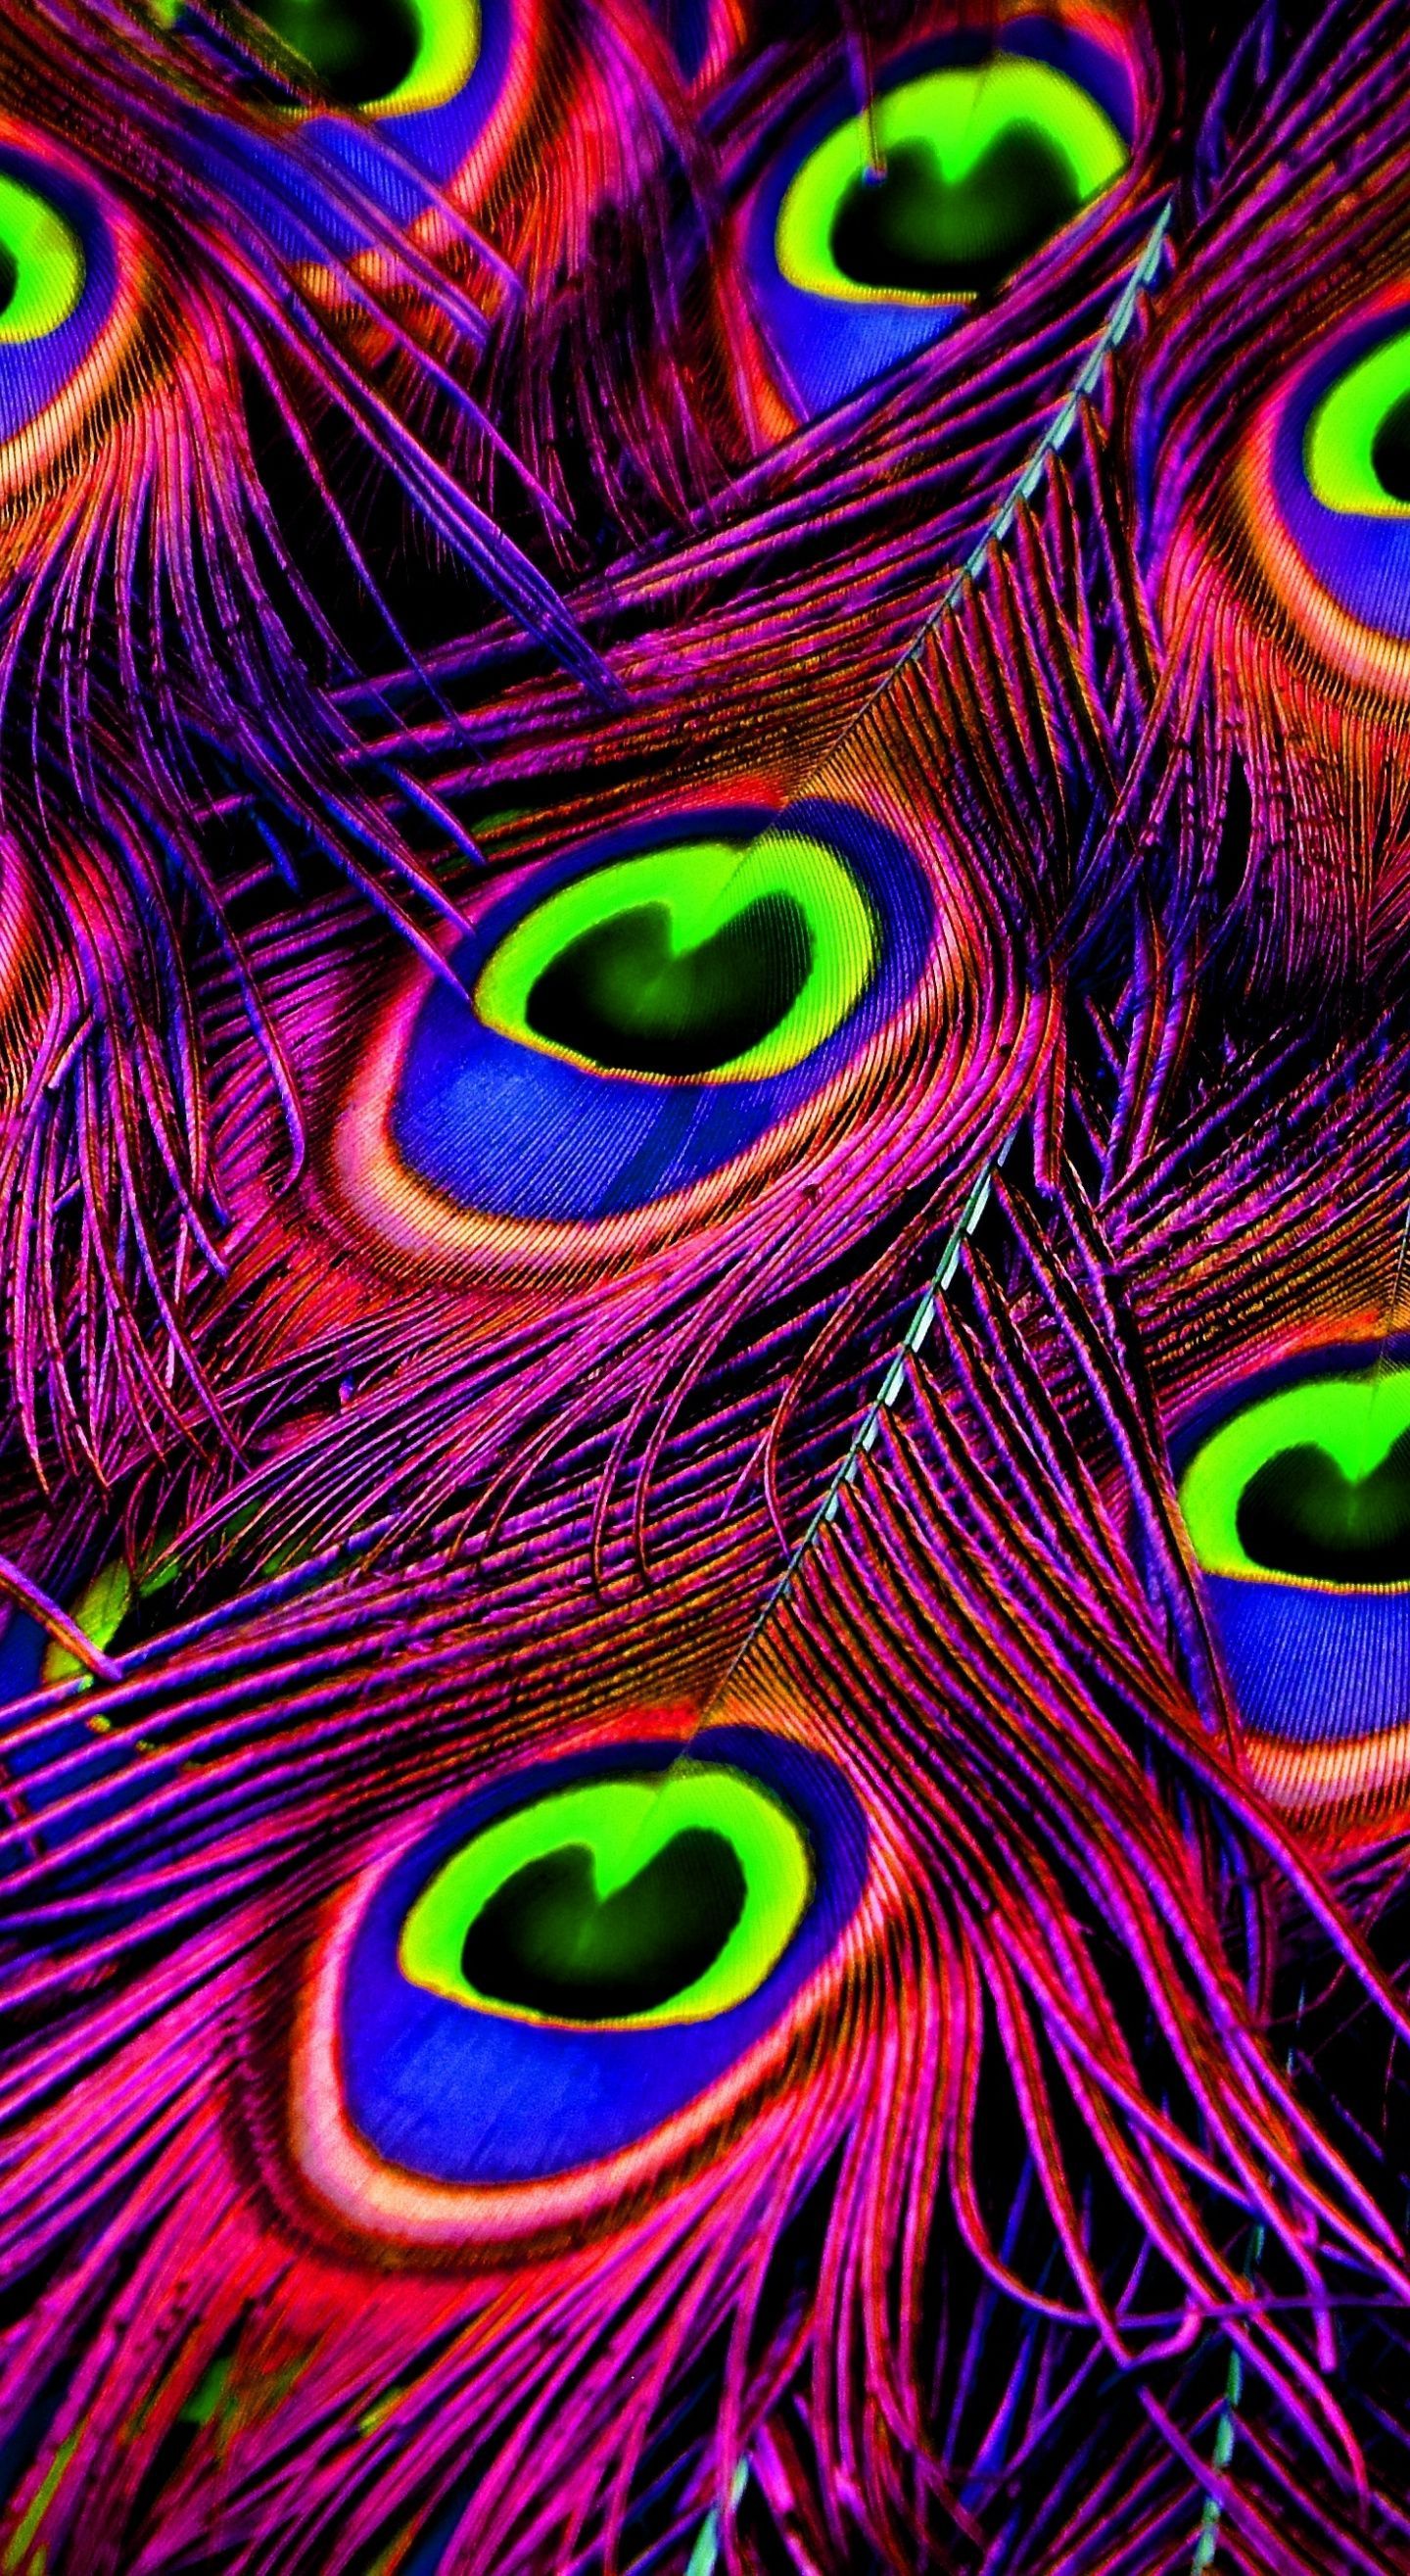 Feather, plumage, peacock, 1440x2630 wallpaper. Feather wallpaper